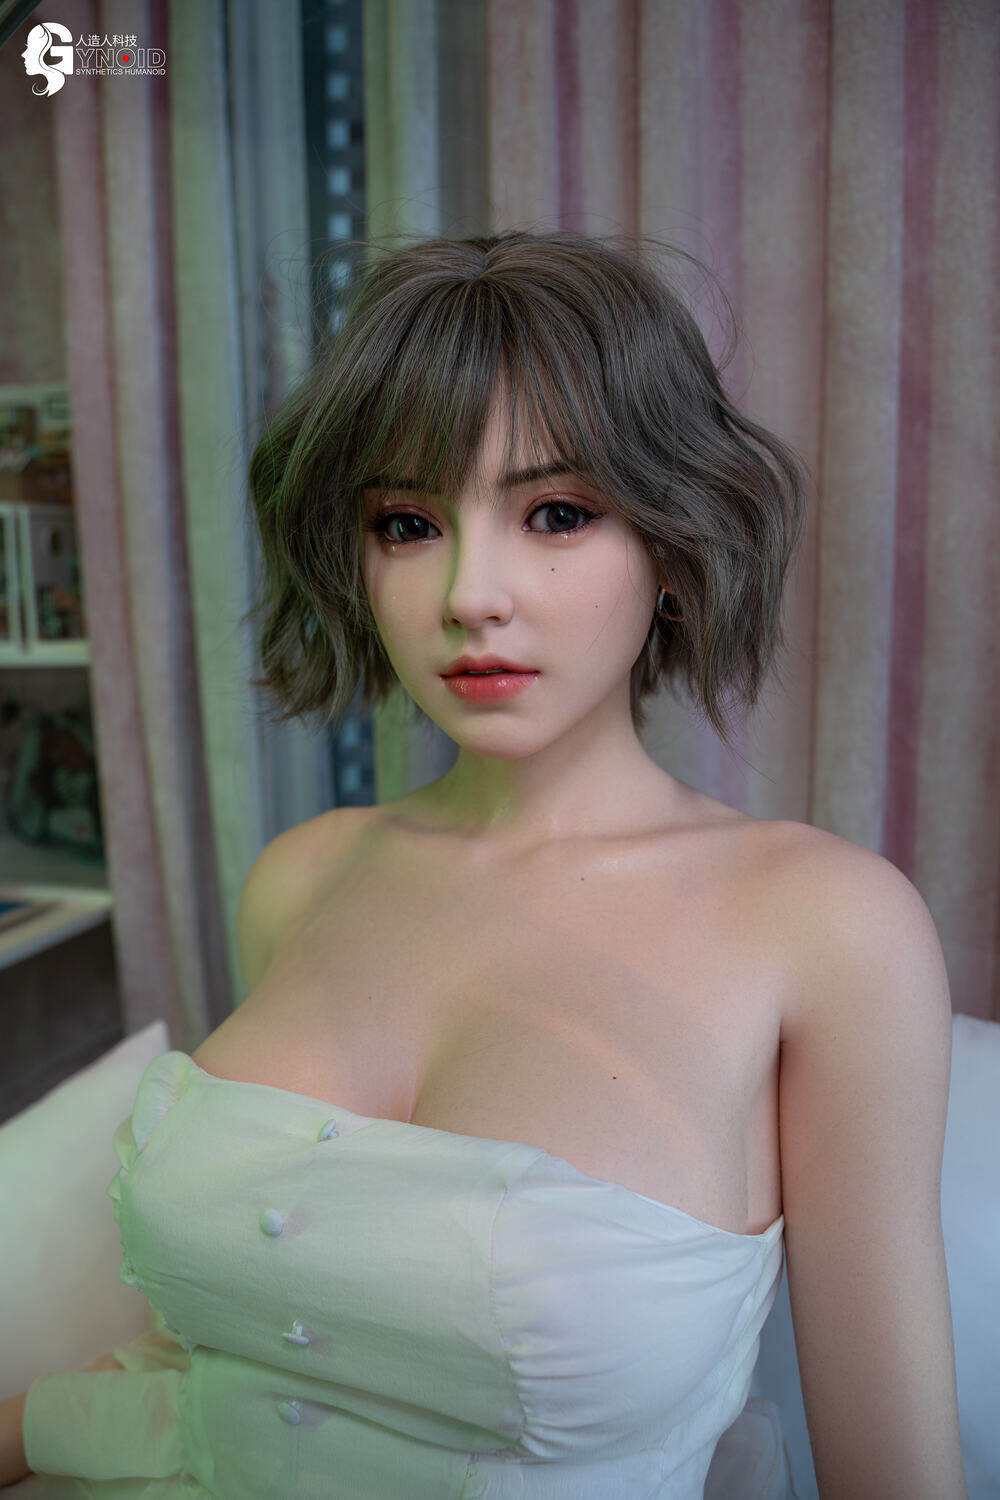 Mariana-163cm(5ft4) Gynoid Adult Doll E-Cup Normal Skin Tone Big Boobs Silicone Dolls image3